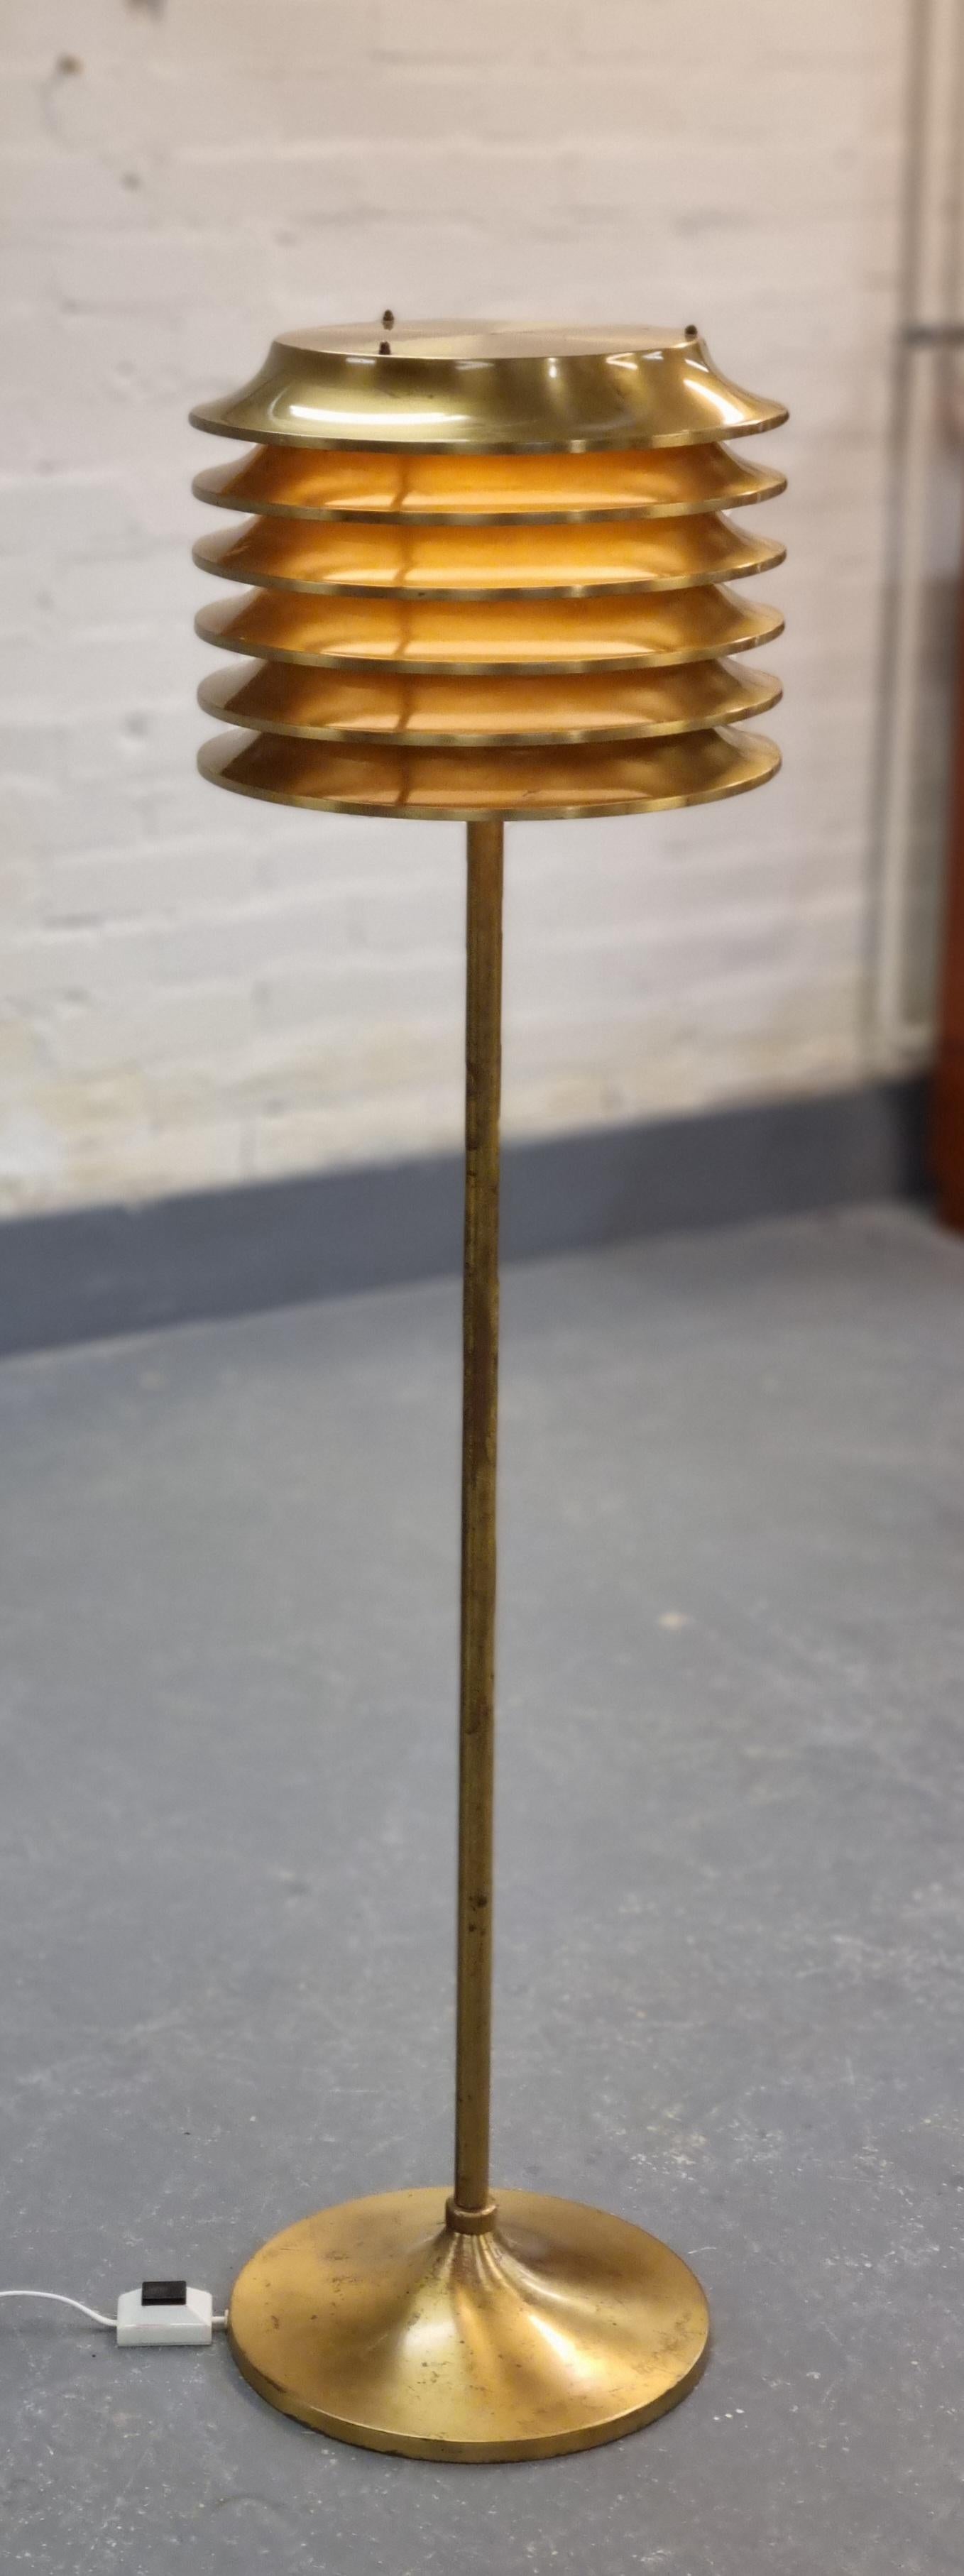 This lamp was designed by Kai Ruokonen, originally for the Vaakuna Hotel in Helsinki in the 1970s. The same model was also used later in the Palace Hotel Helsinki. A very simple yet elegant heavy duty lamp in full brass with a beautiful